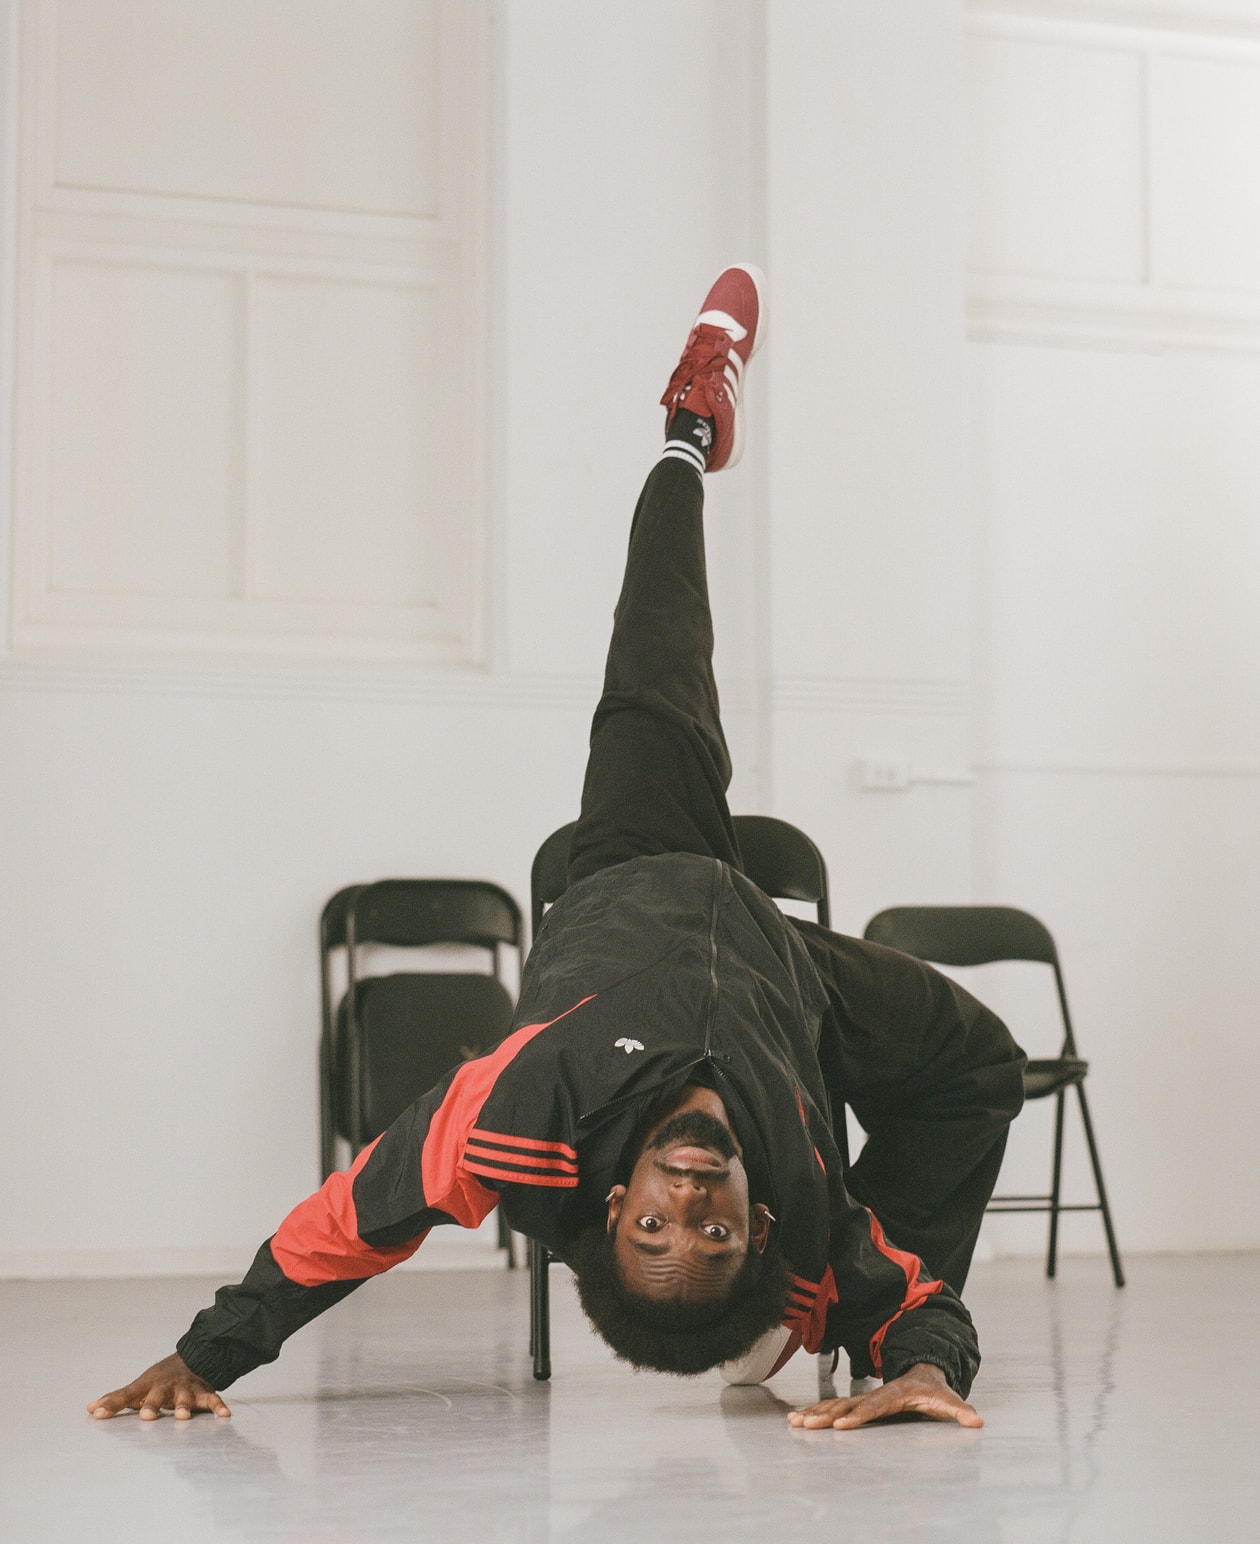 adidas Originals Dance Battles Redefining Rivalry with Tony Oxybel and B-Girl Mags